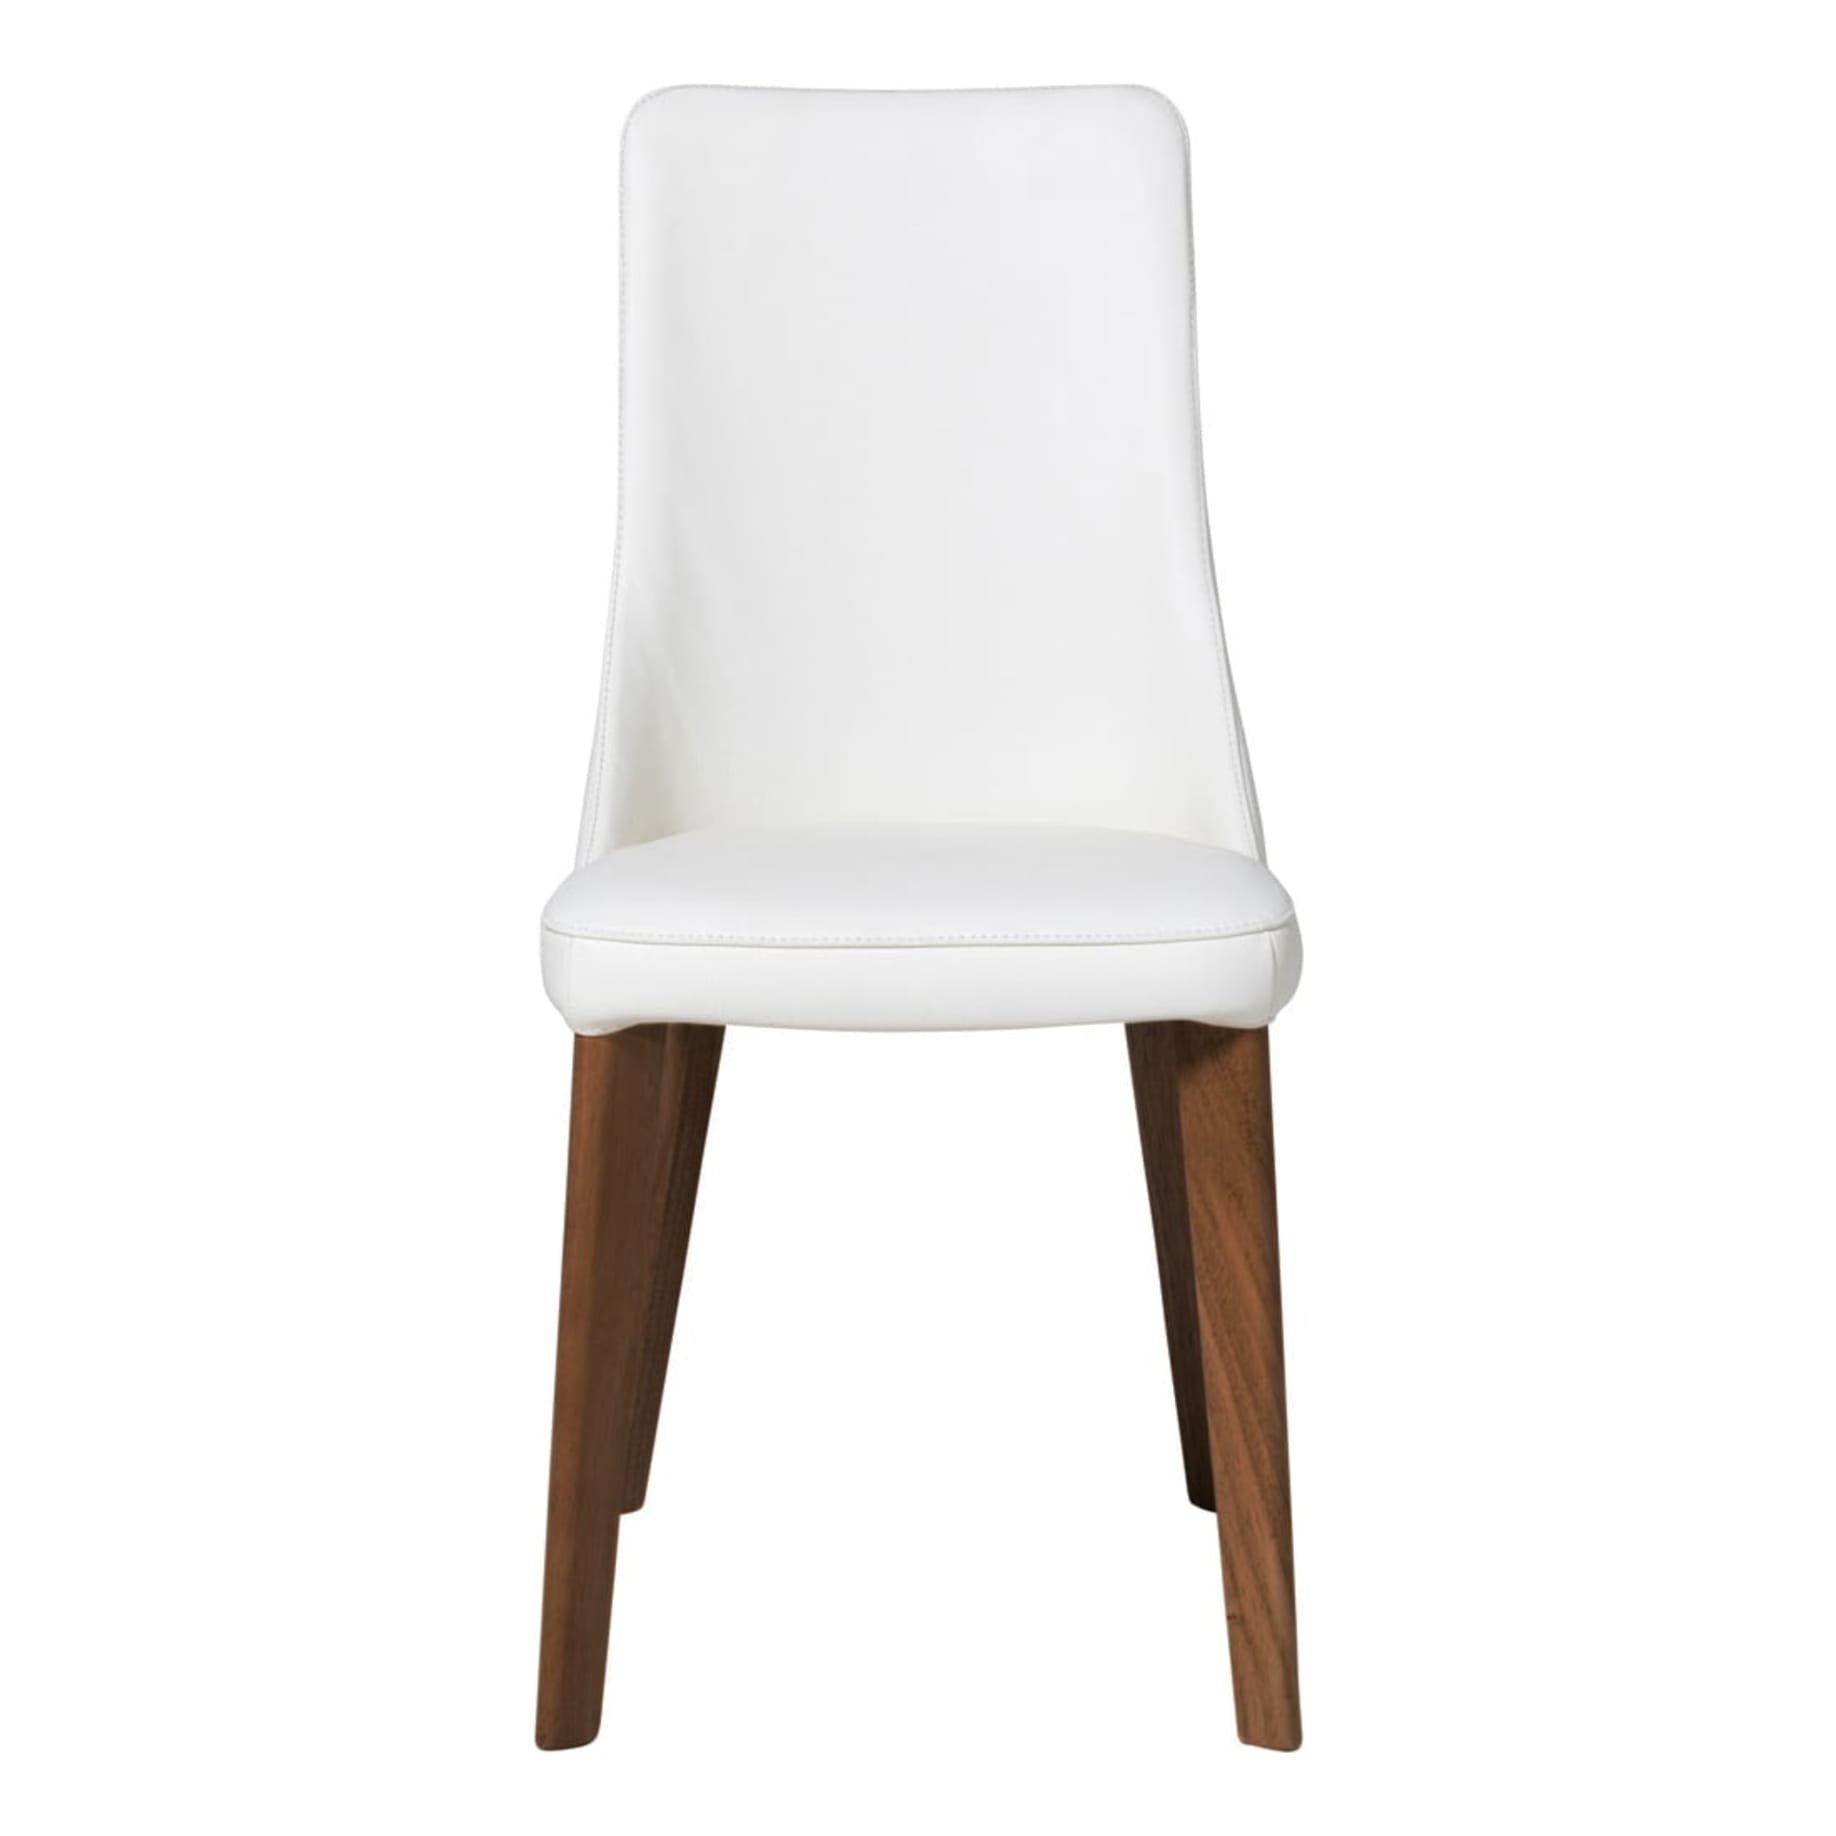 Panama Dining Chair in Leather Pure White / Blackwood Stain